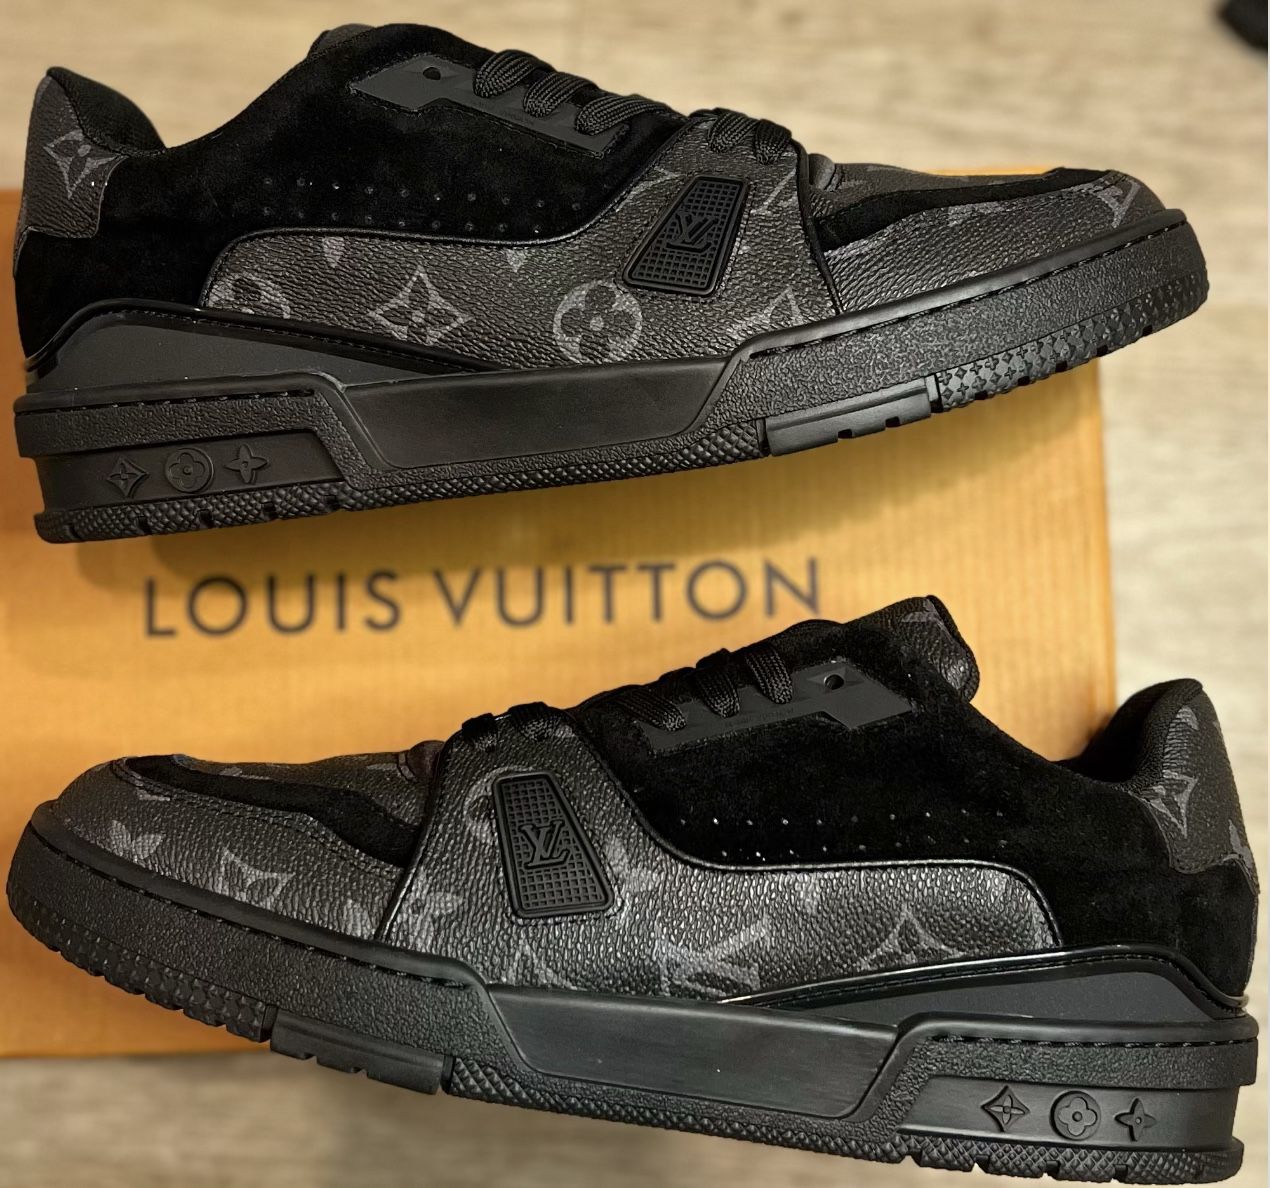 Louis Vuitton Sneakers Brand New With Box And Dust Bag. Men